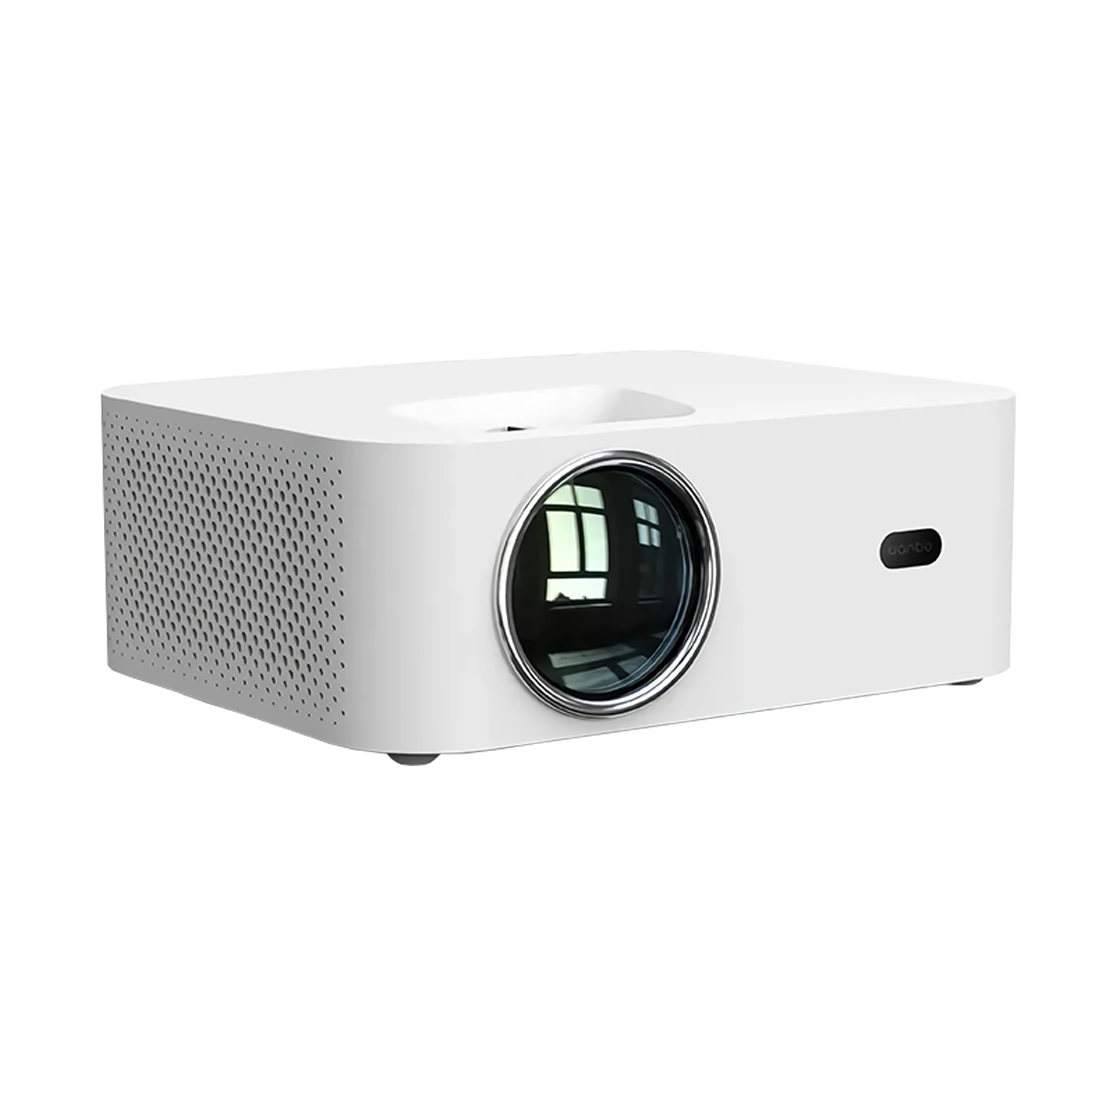 wanbo-portable-video-projector-x1-pro